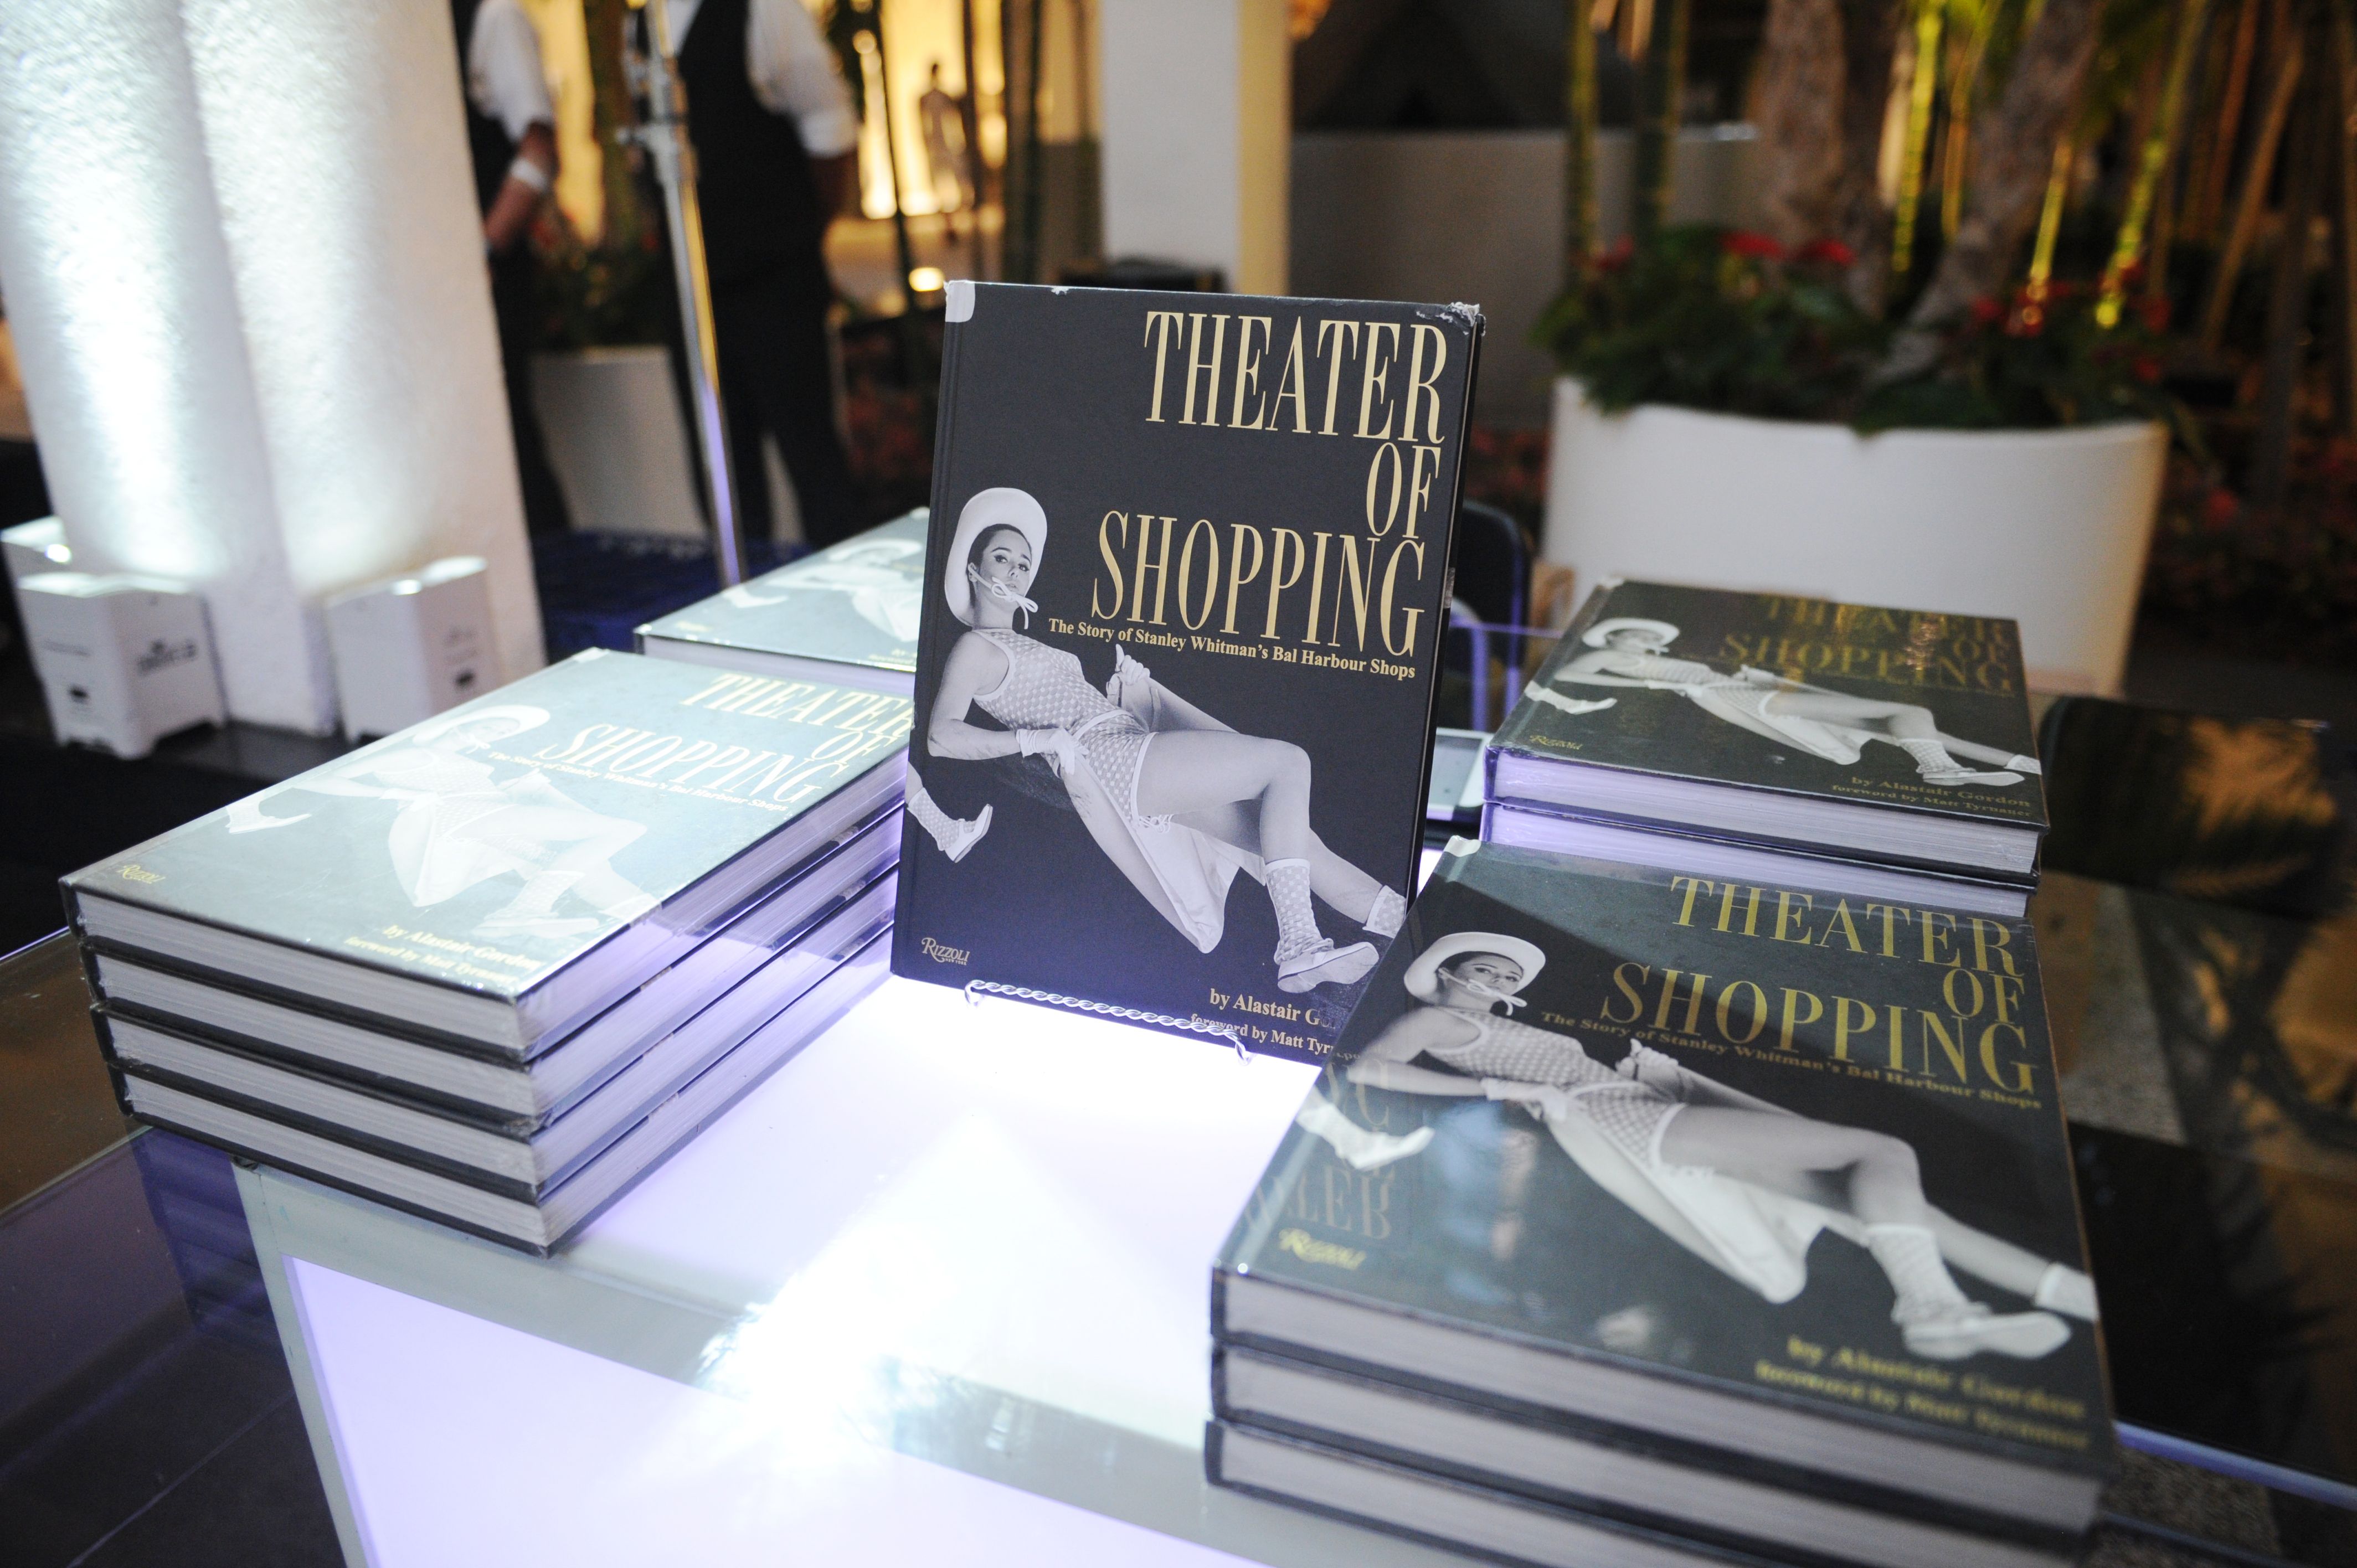 Theater of Shopping by Rizzoli